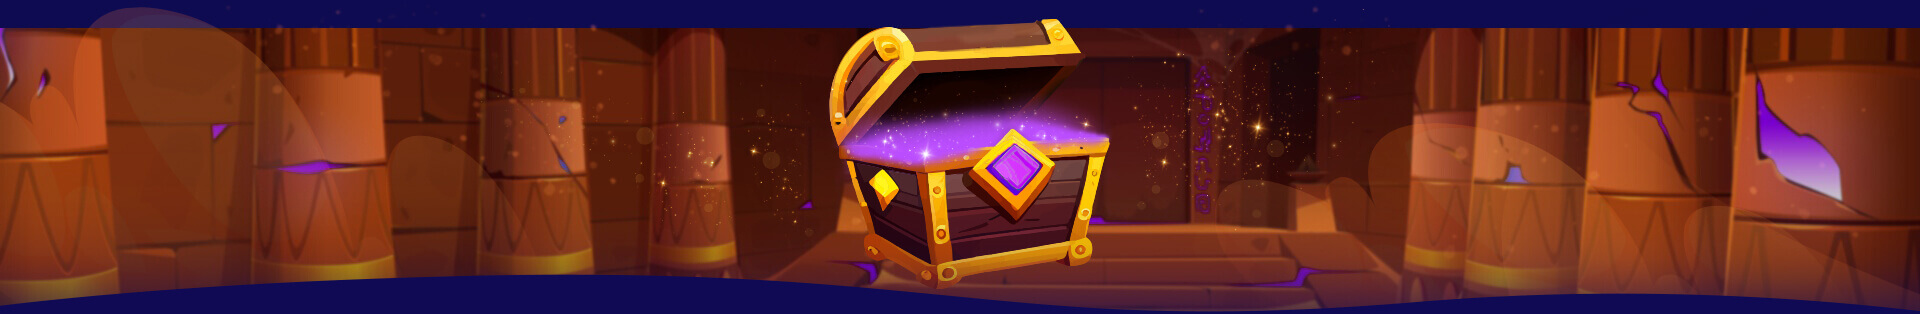  A mystical hallway with purple glowing dunes, a purple treasure box and golden accents